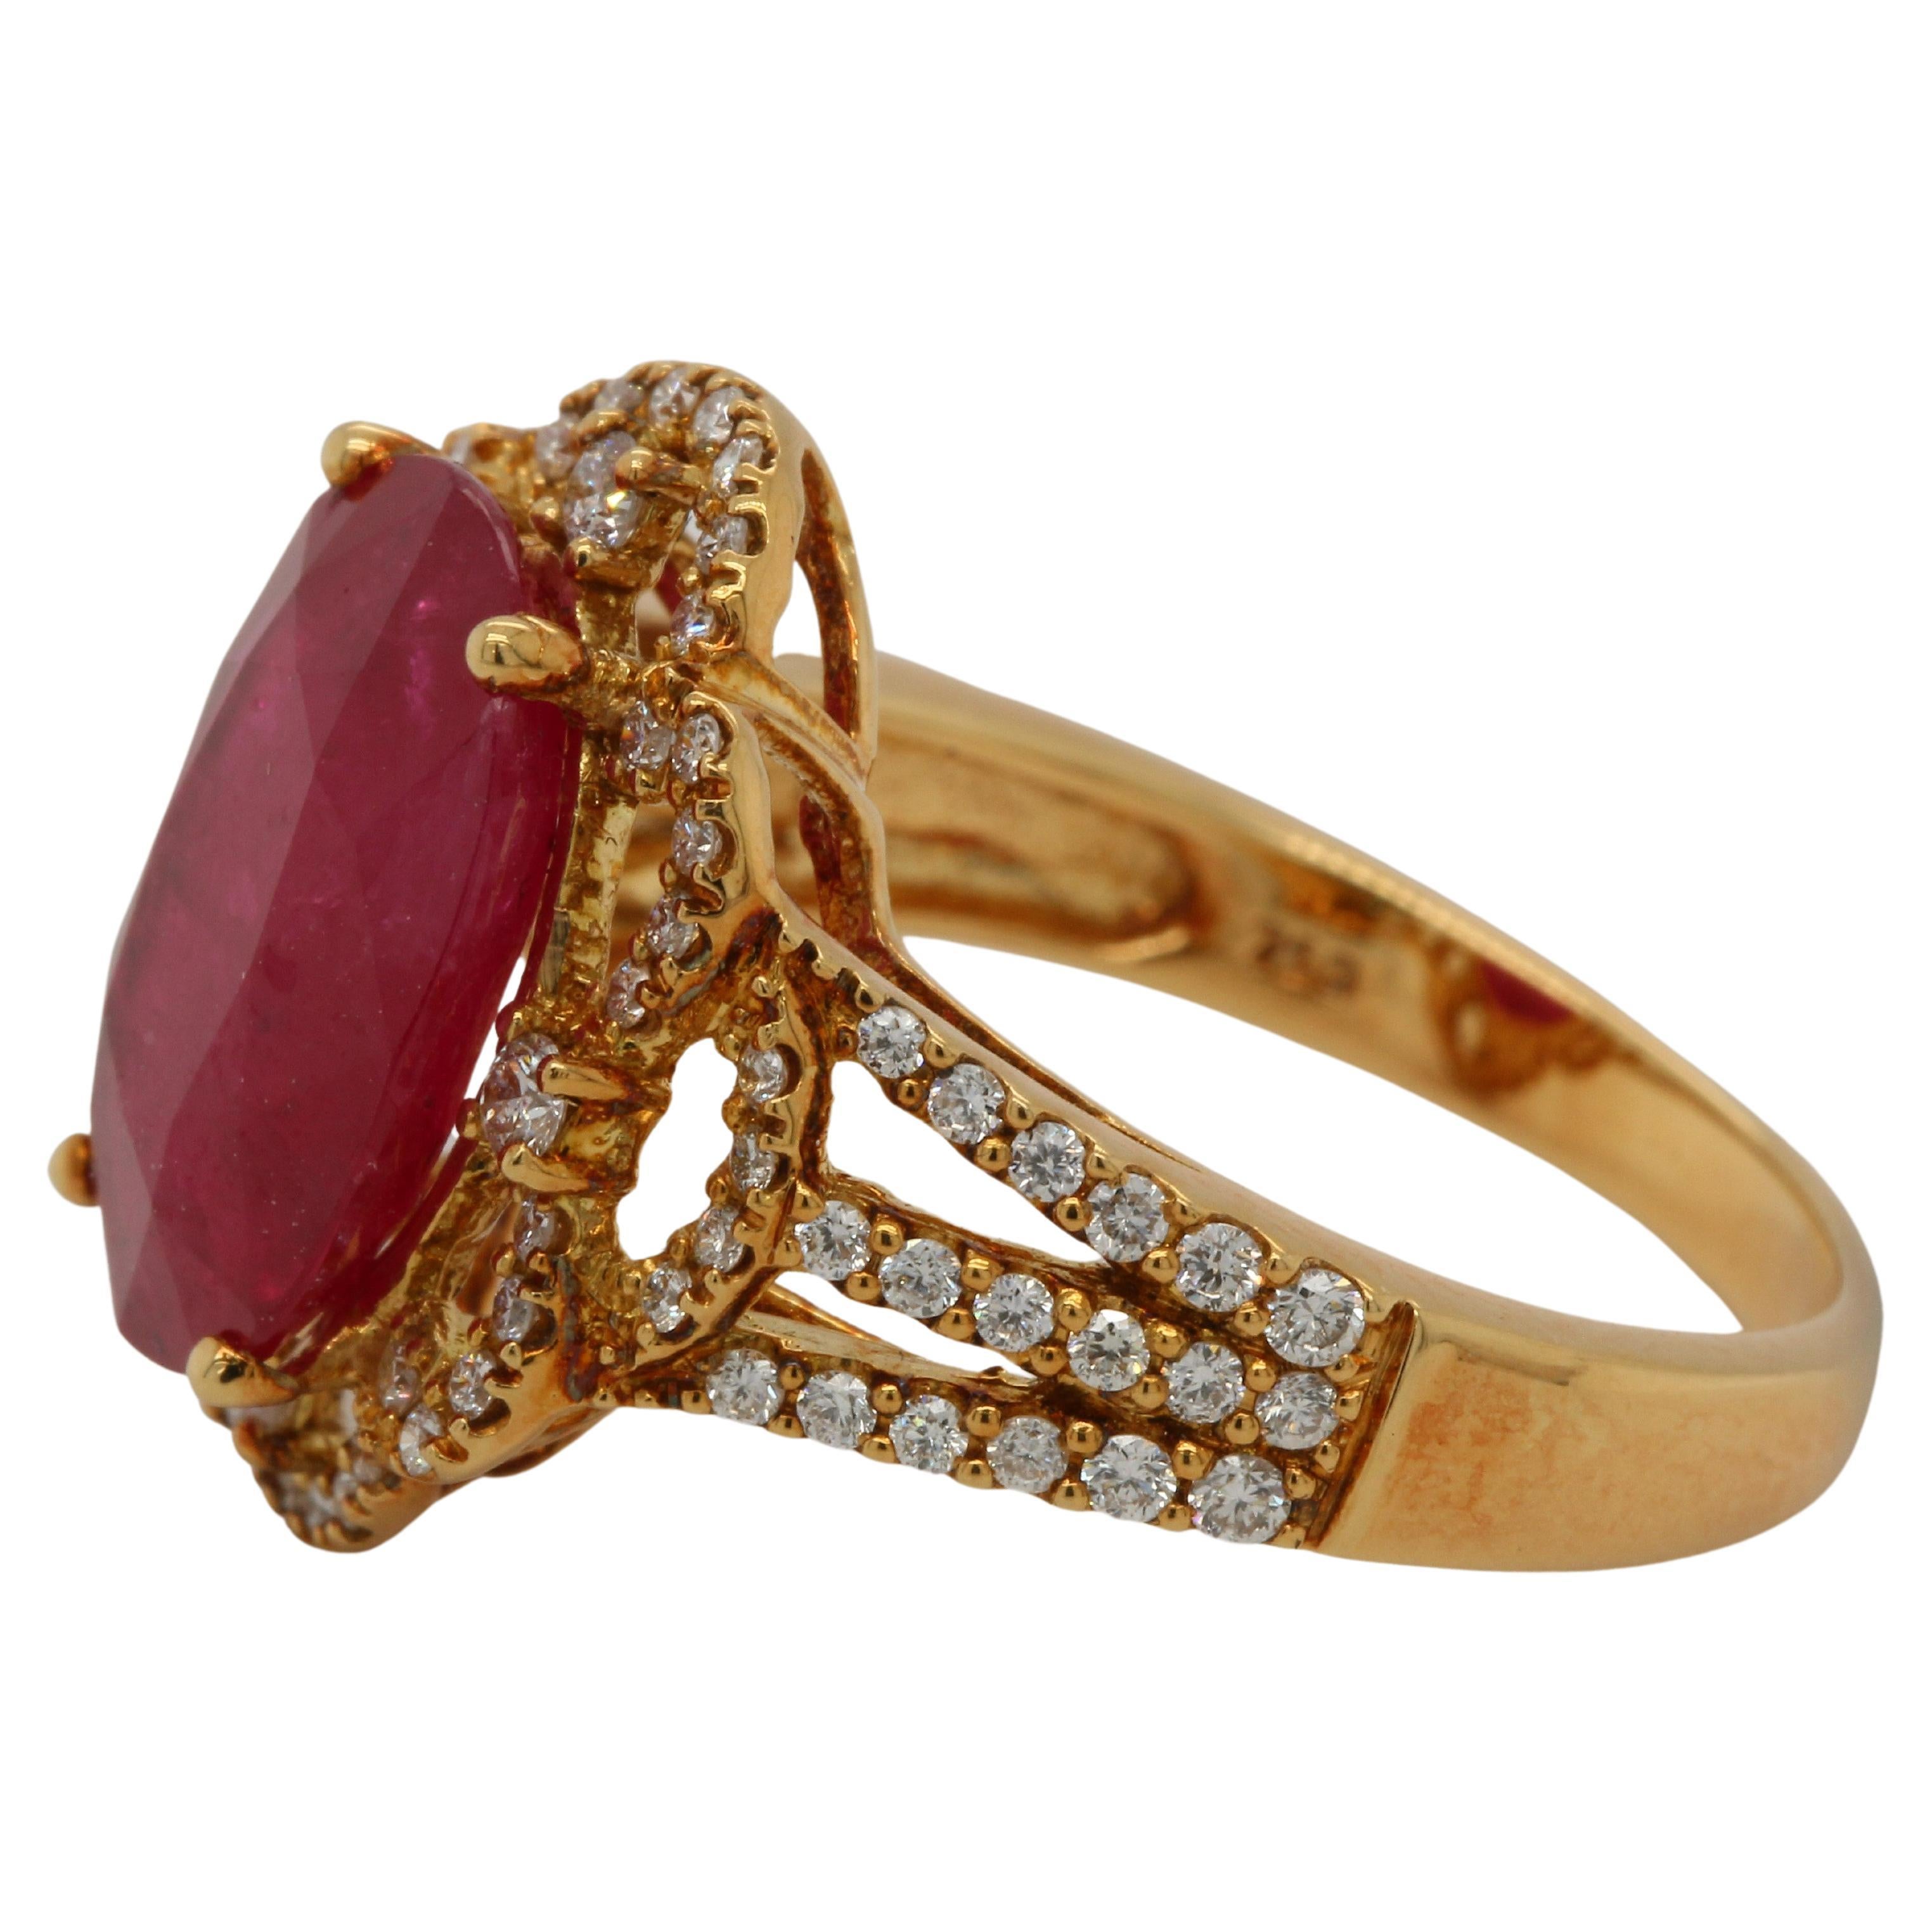 5.19 Carat Ruby And Diamond Ring In 18 Karat Gold For Sale 1